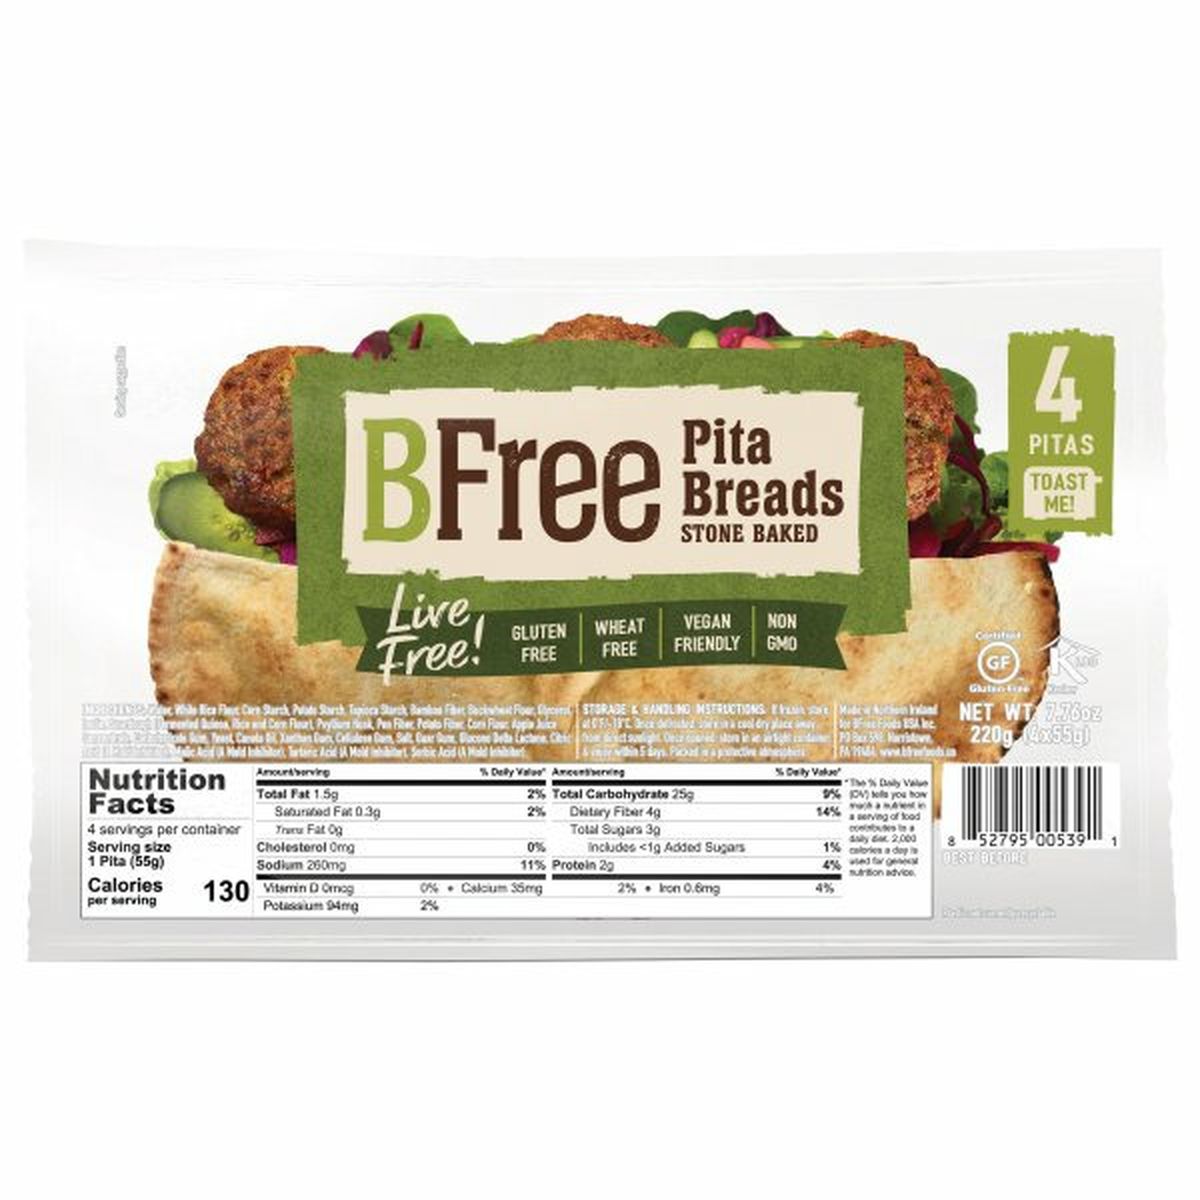 Calories in BFree Pita Breads, Stone Baked